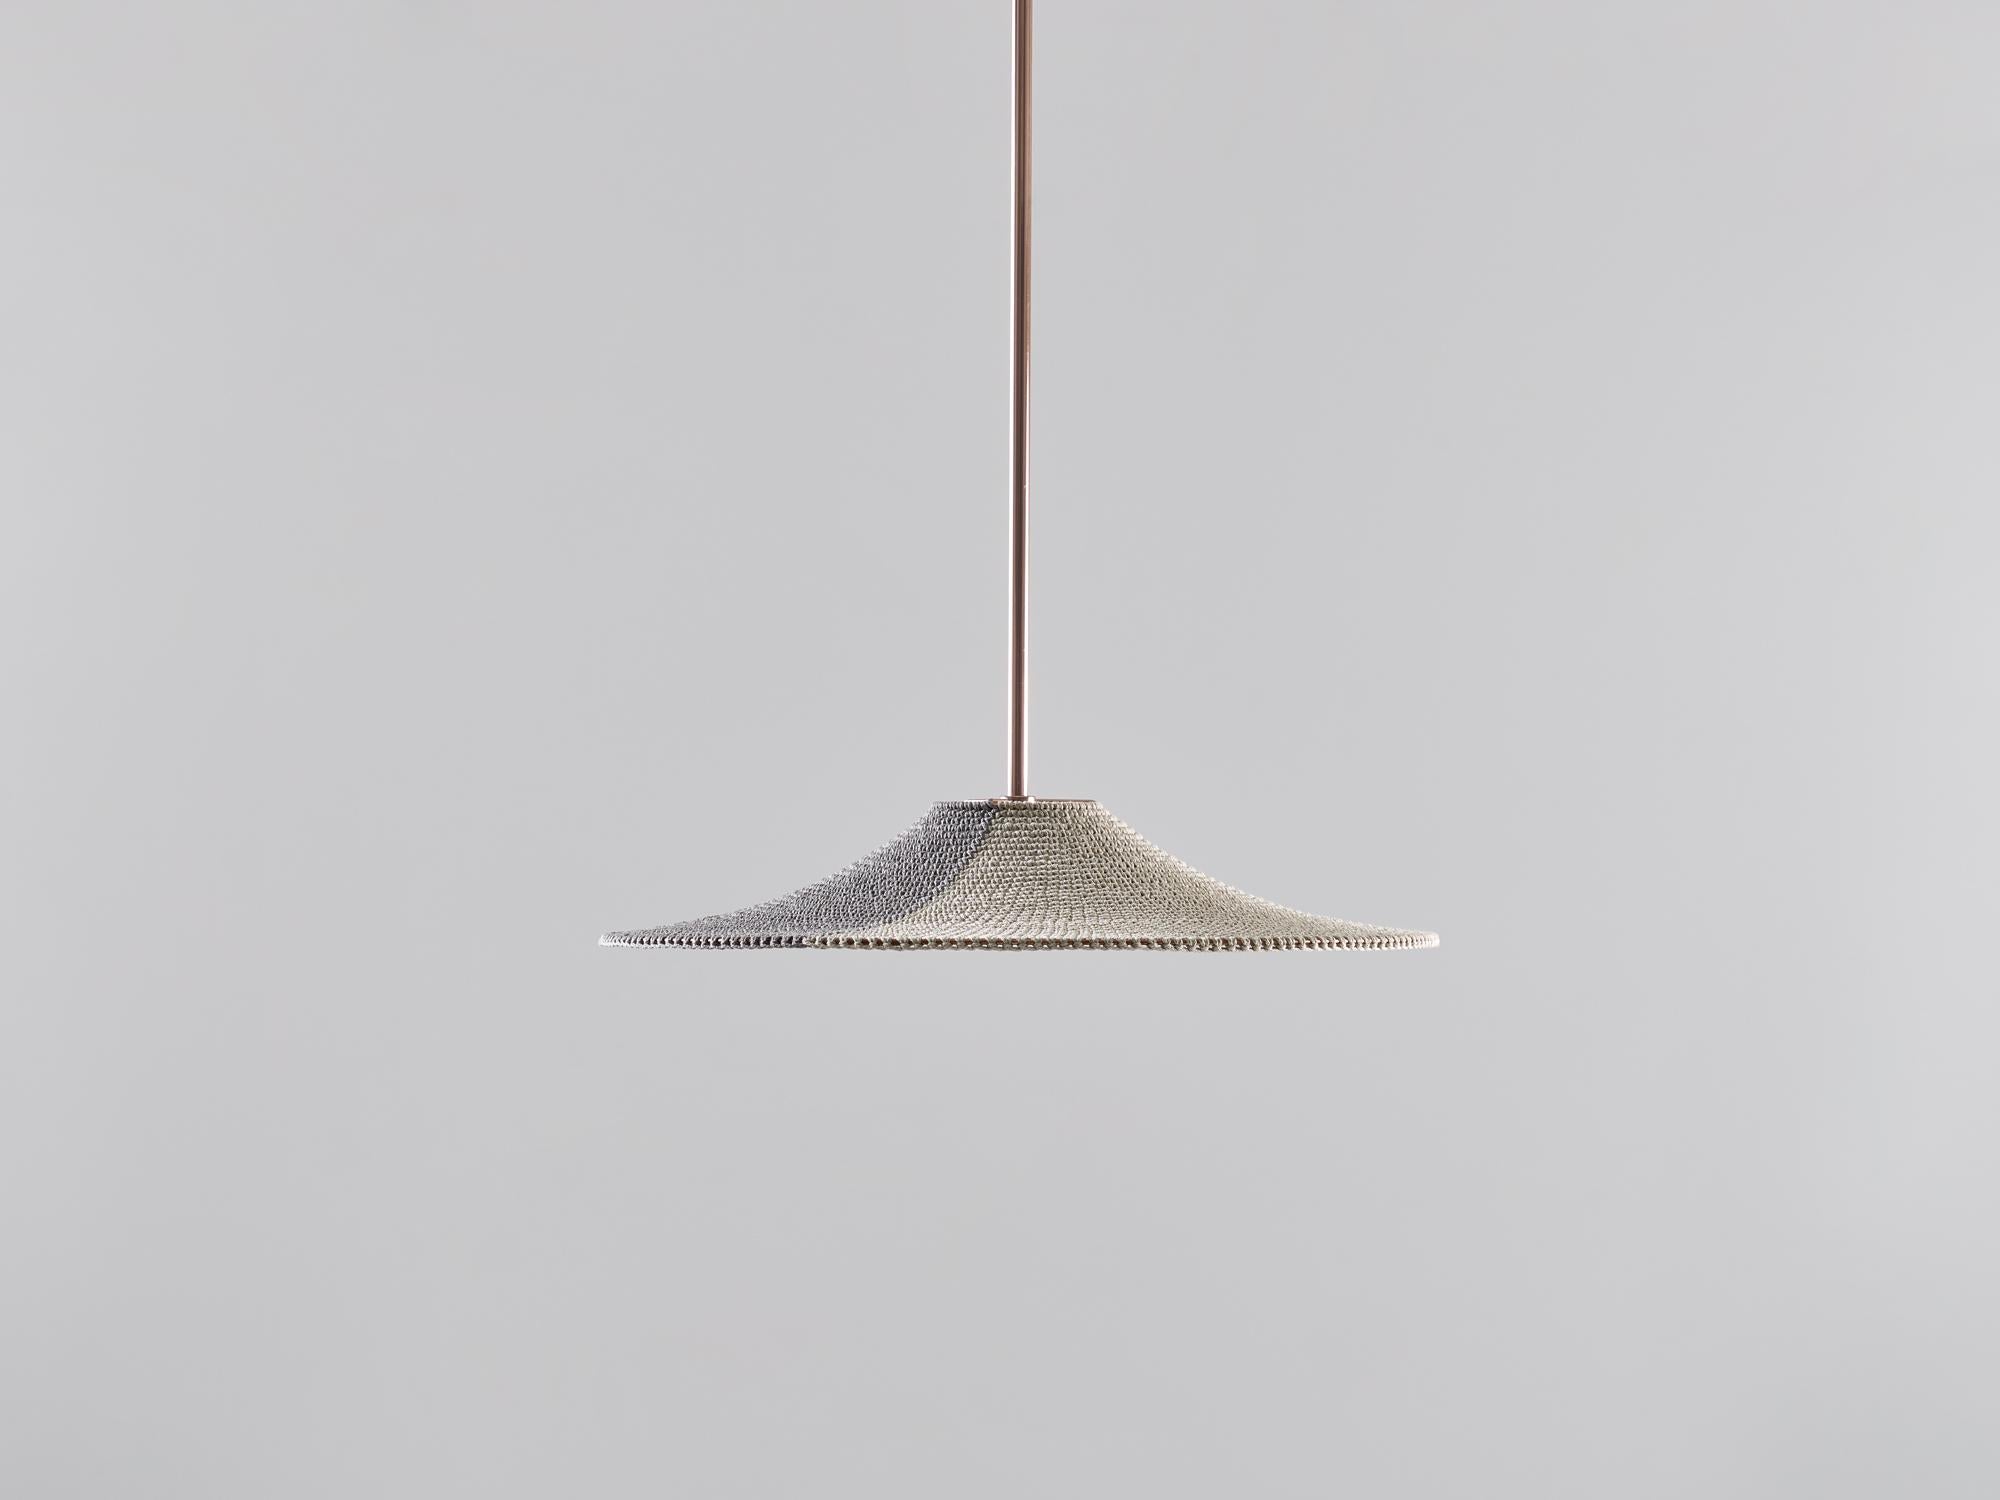 Small simple shade 01 50/50 pendant lamp by Naomi Paul
Dimensions: D 50 x H 8 cm
Materials: Metal frame, Egyptian cotton cord.
Colors: Down grey and Ecru.
Available in other colors and in 3 sizes: D50, D60, D80 cm.
Available in plain, 50/50,